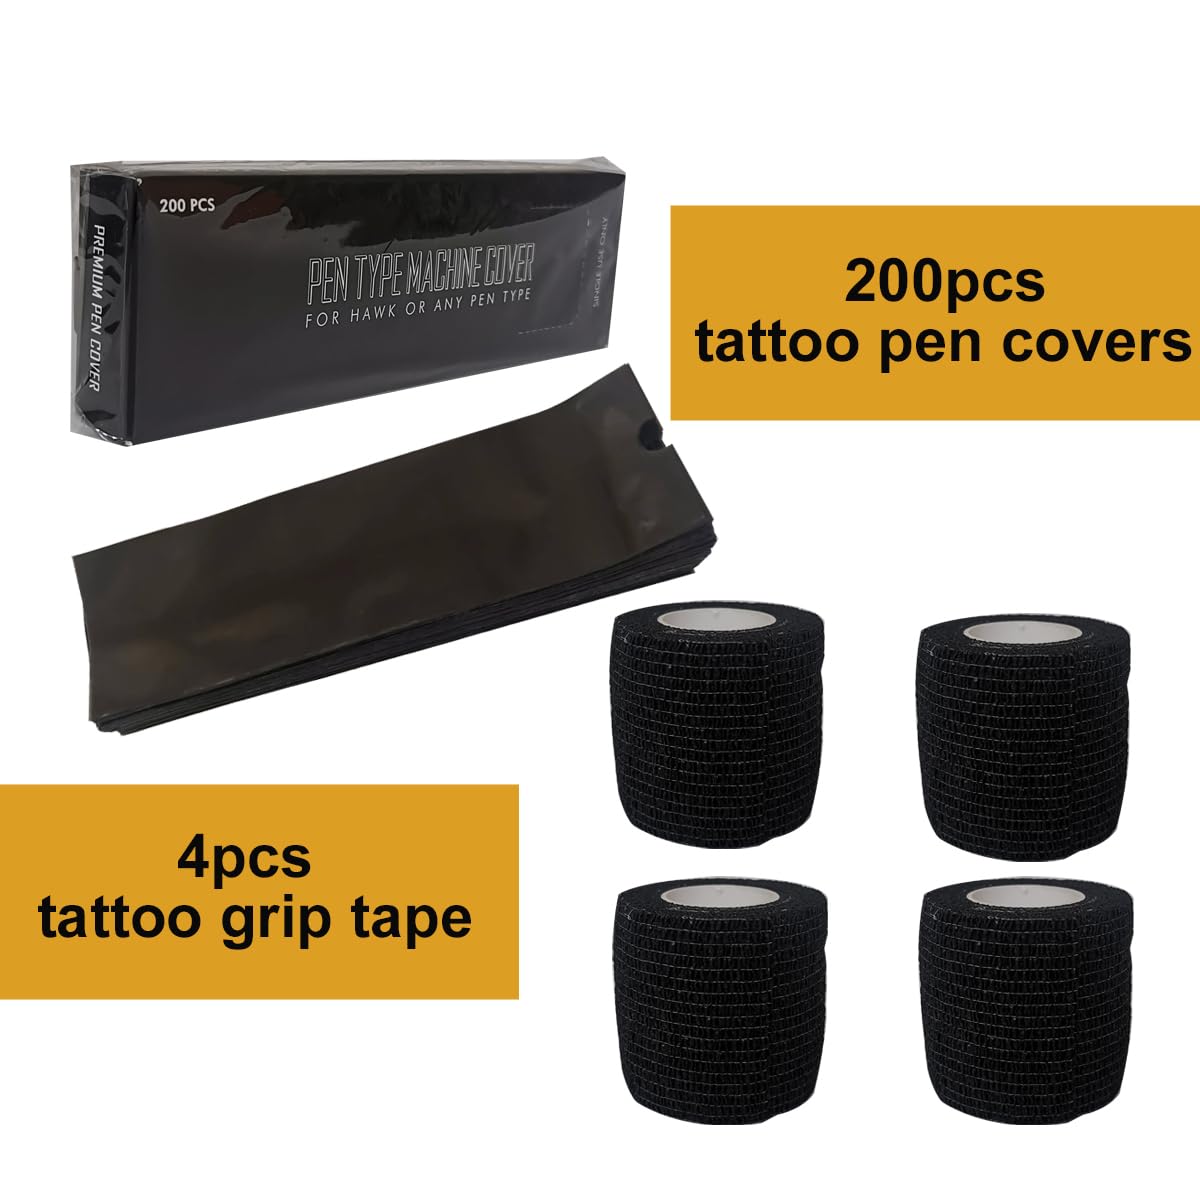 NEEDLEWALK Pen Machine Covers with Grip Tapes 200pcs Tattoo Pen Covers and 4pcs Tattoo Grip Wrap Tattoo Machine Bags Tattoo Grip Covers Tattoo Pen Sleeves Combination Tattoo Supplies